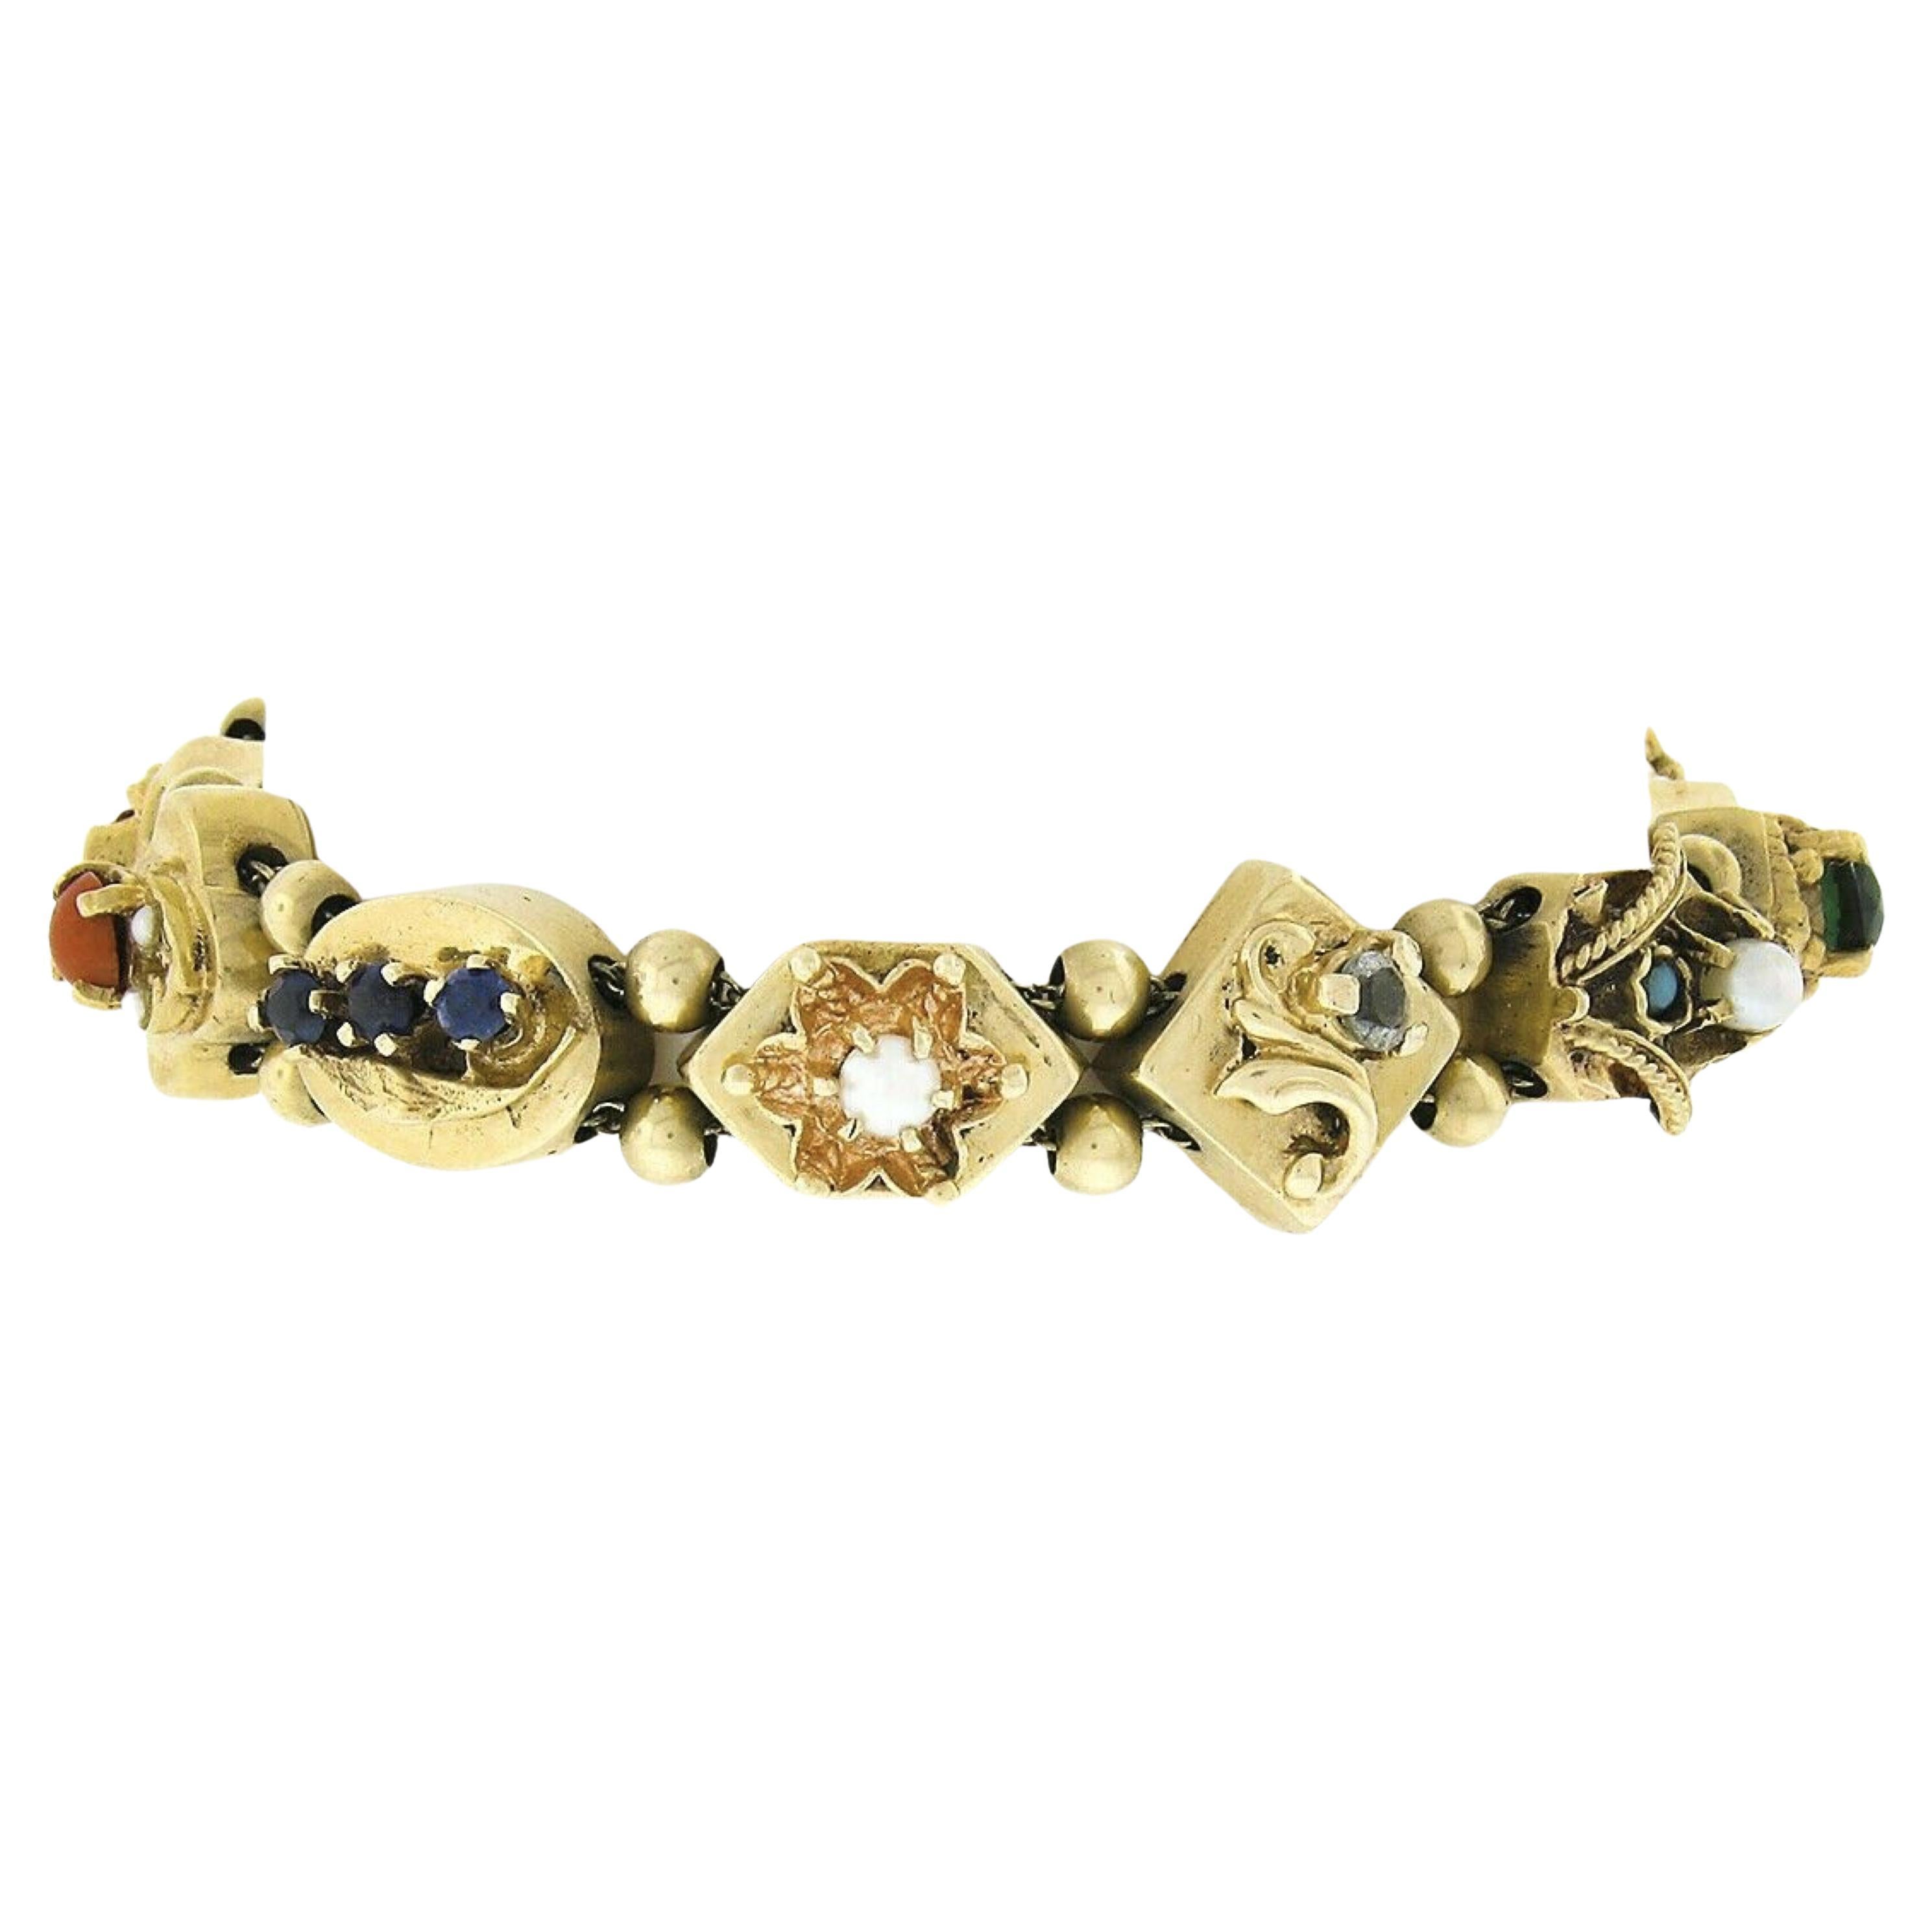 This gorgeous vintage slide bracelet was crafted from solid 14k yellow gold and features an incredibly unique design adorned with multiple gemstones throughout. The charms and polished gold beads slide freely on the dual cable link chains that run